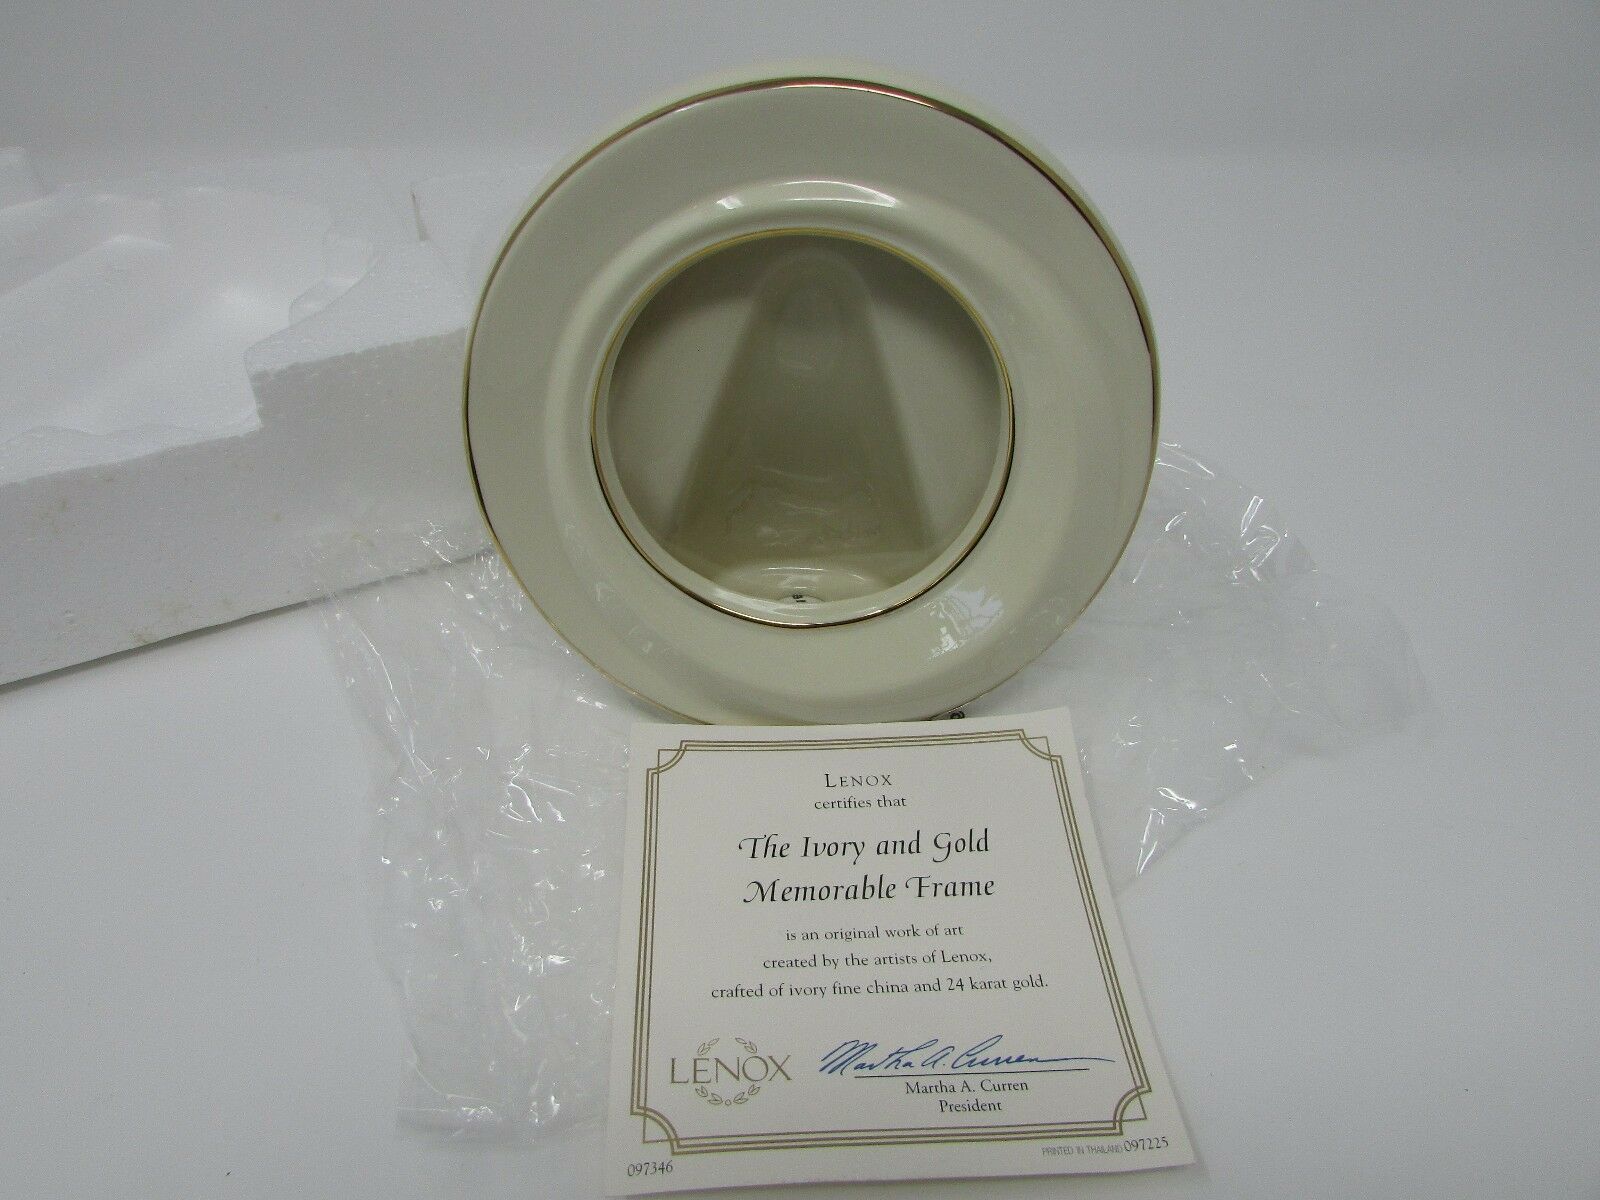 LENOX CHINA IVORY & GOLD MEMORABLE FRAME MINT IN BOX COA 24 KT GOLD ACCENT - $5.89